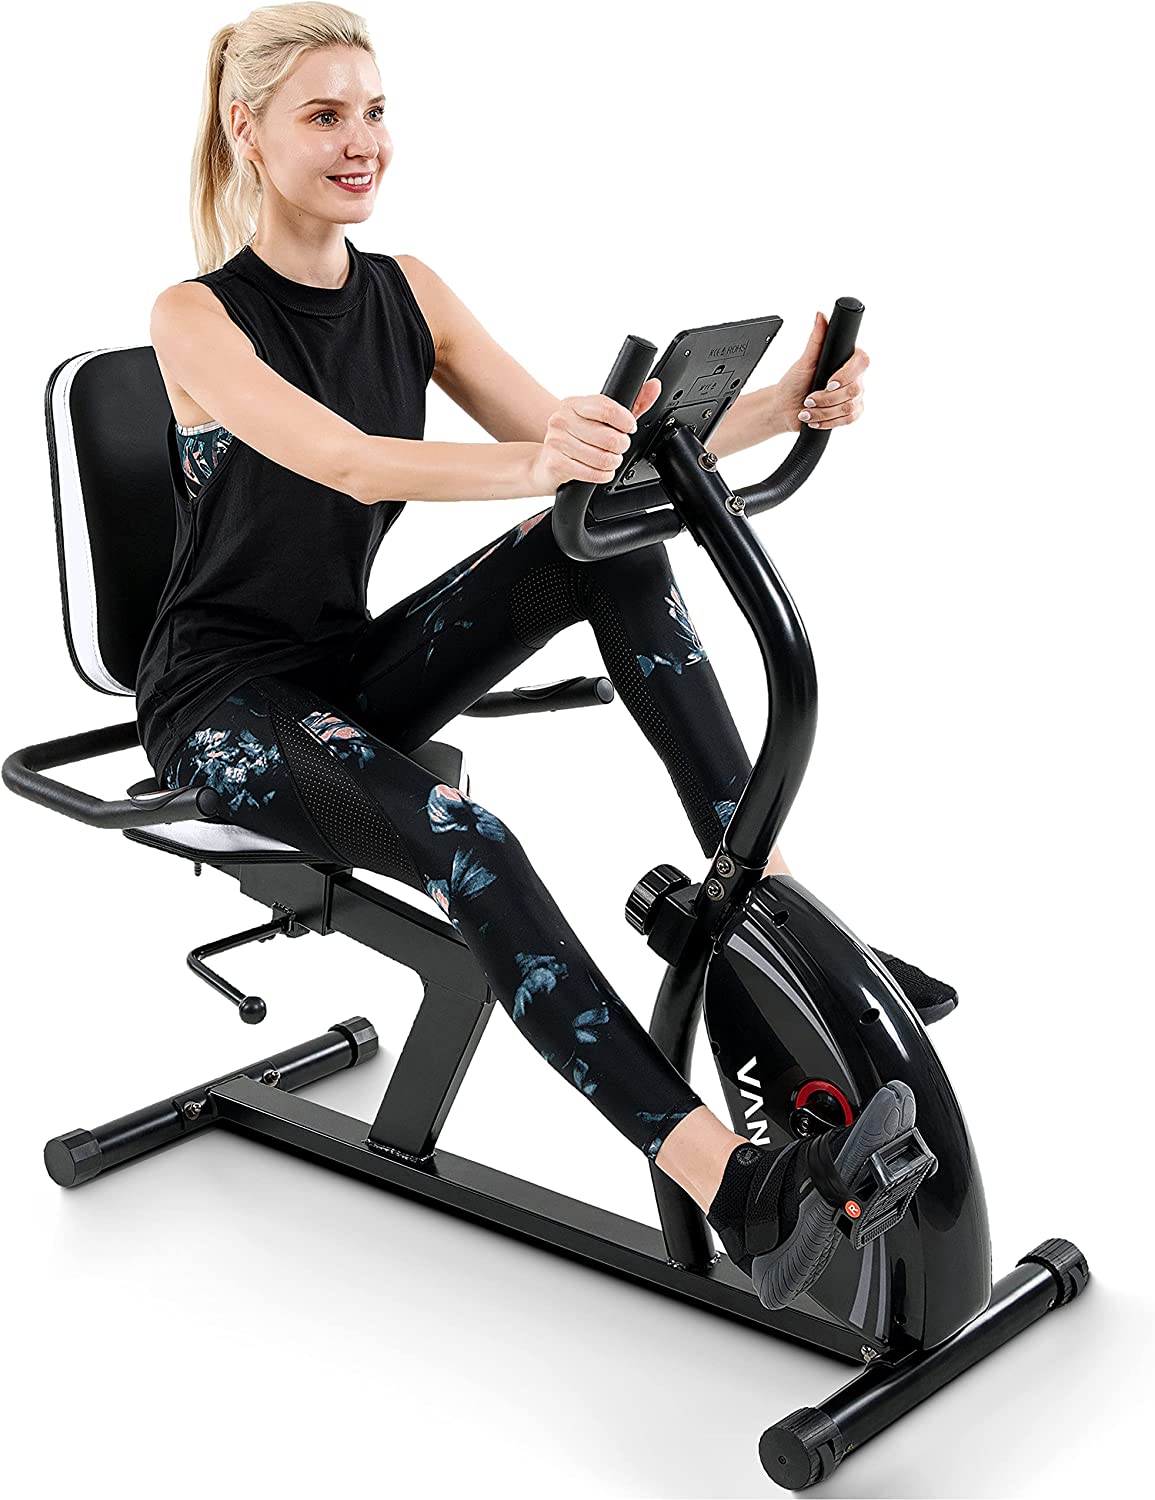 Indoor Recumbent Bicycle with Bluetooth Monitor and Comfortable Seat Cushion,  Professional Exercise Bike with Bluetooth Monitor, Compact size Recumbent  Exercise Bike for Home and Gym, 380lbs, S1523 